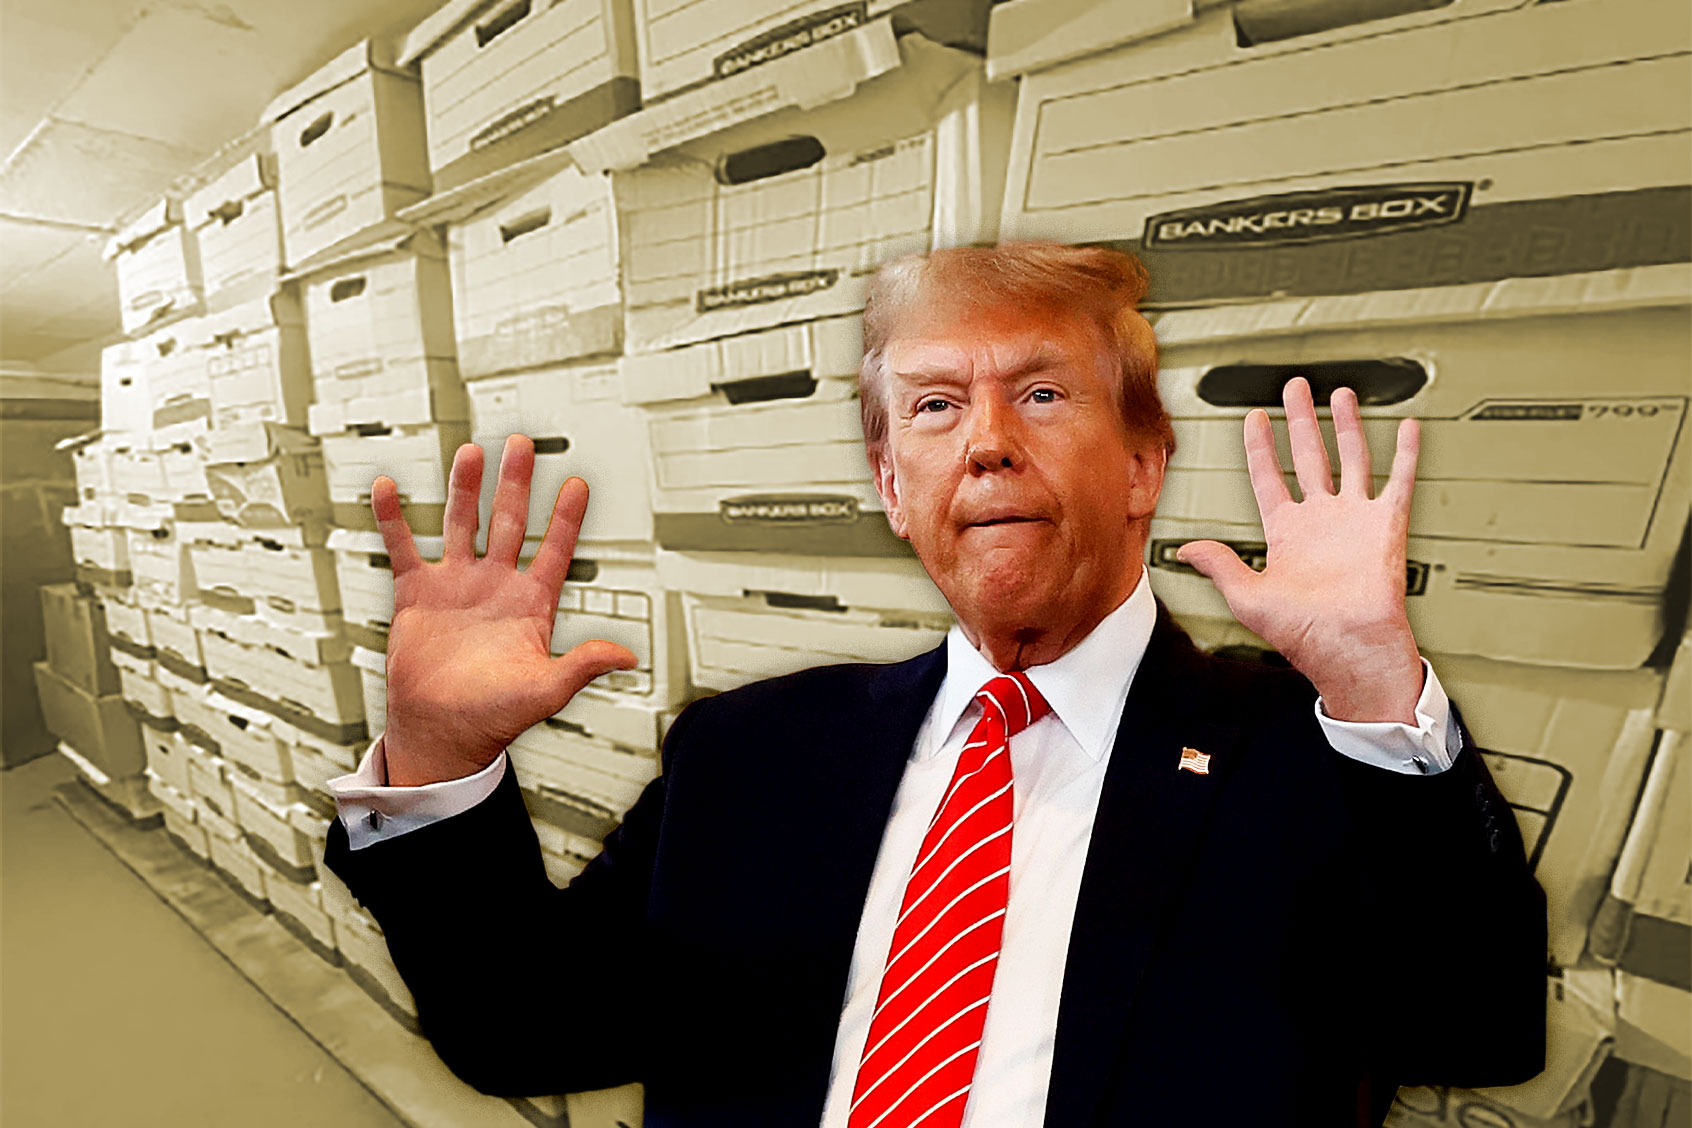 Donald Trump’s classified documents trial is imperative to national security